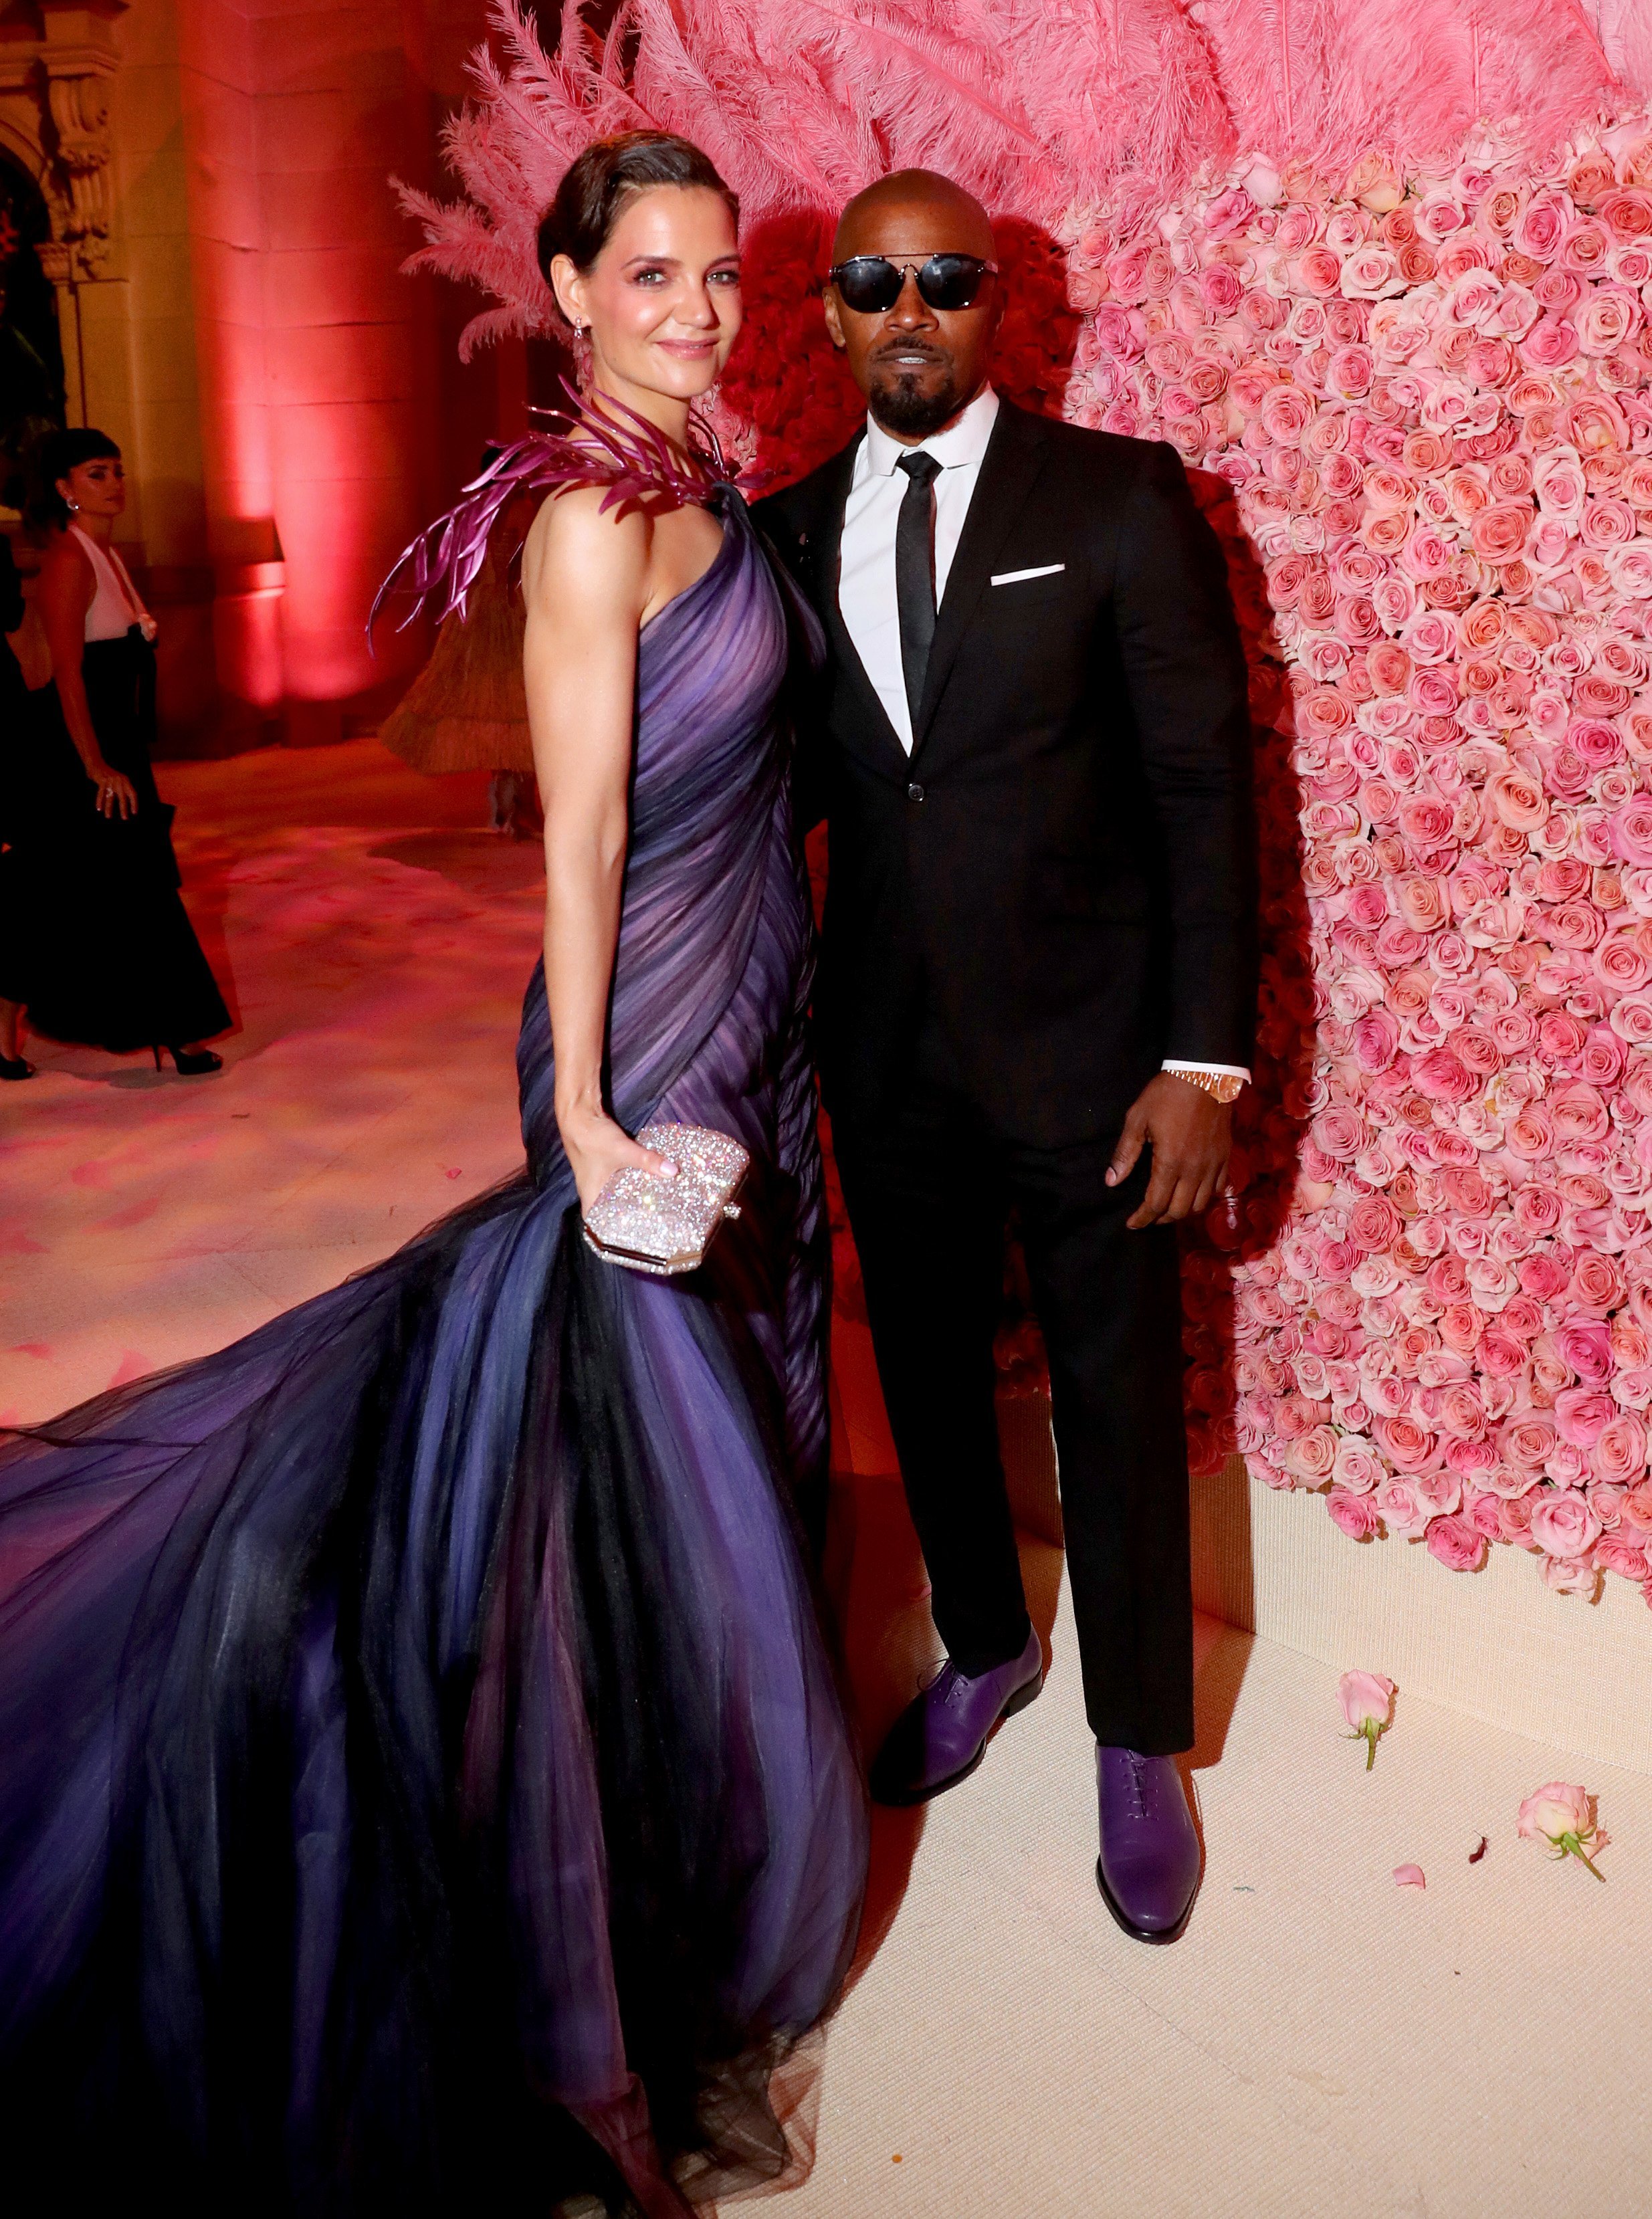 Jamie Foxx and Katie Holmes attend the 2019 Met Gala in New York City on May 6, 2019 | Photo: Getty Images